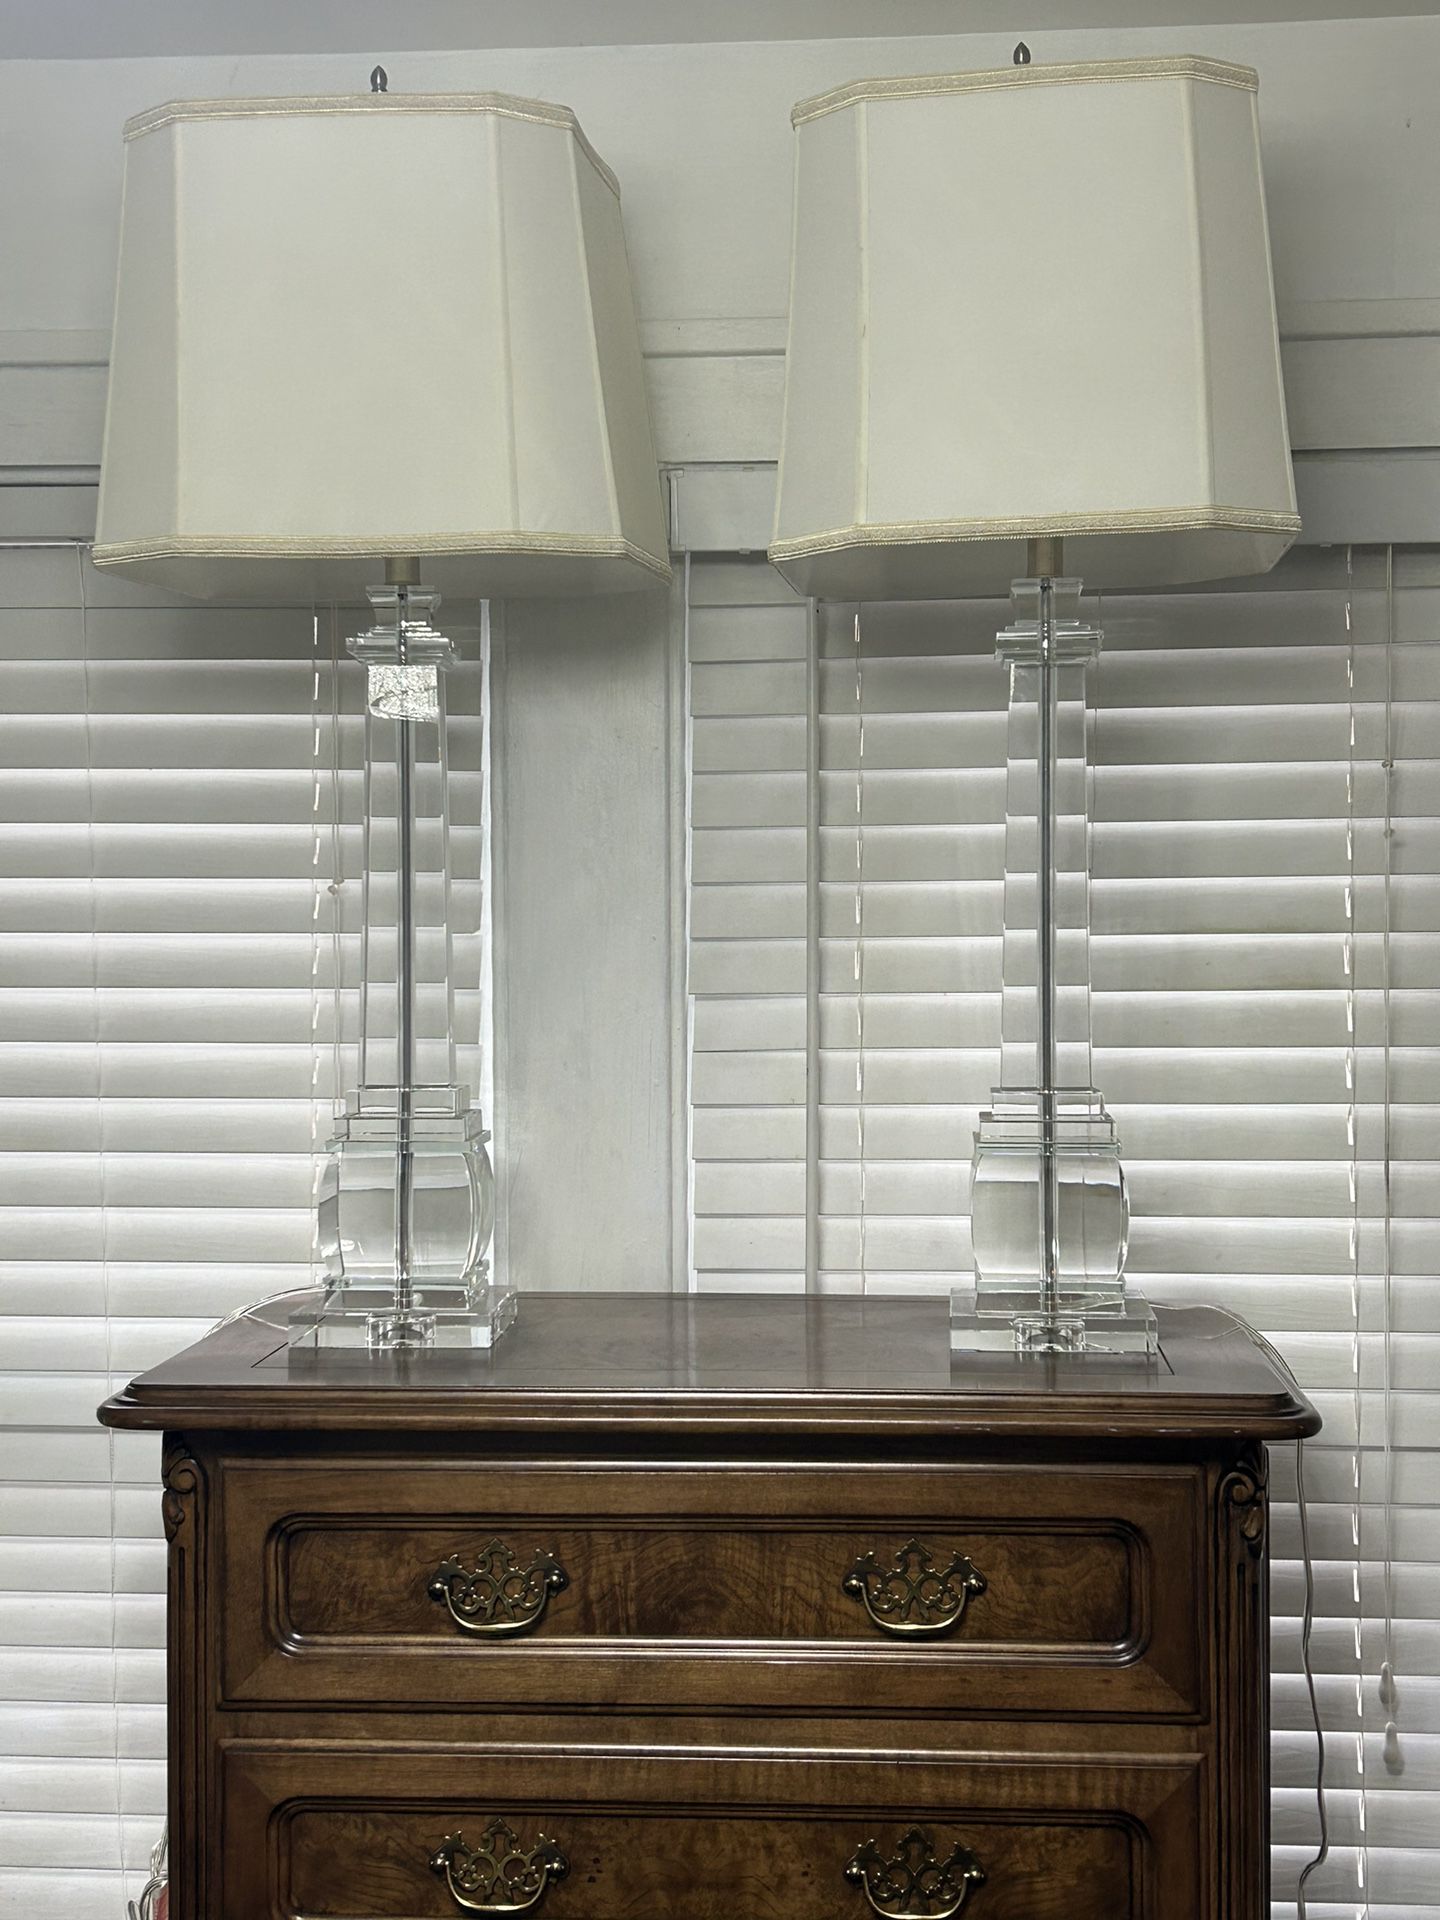 Lead Crystal Lamps From WildWood Lamps And Accents.